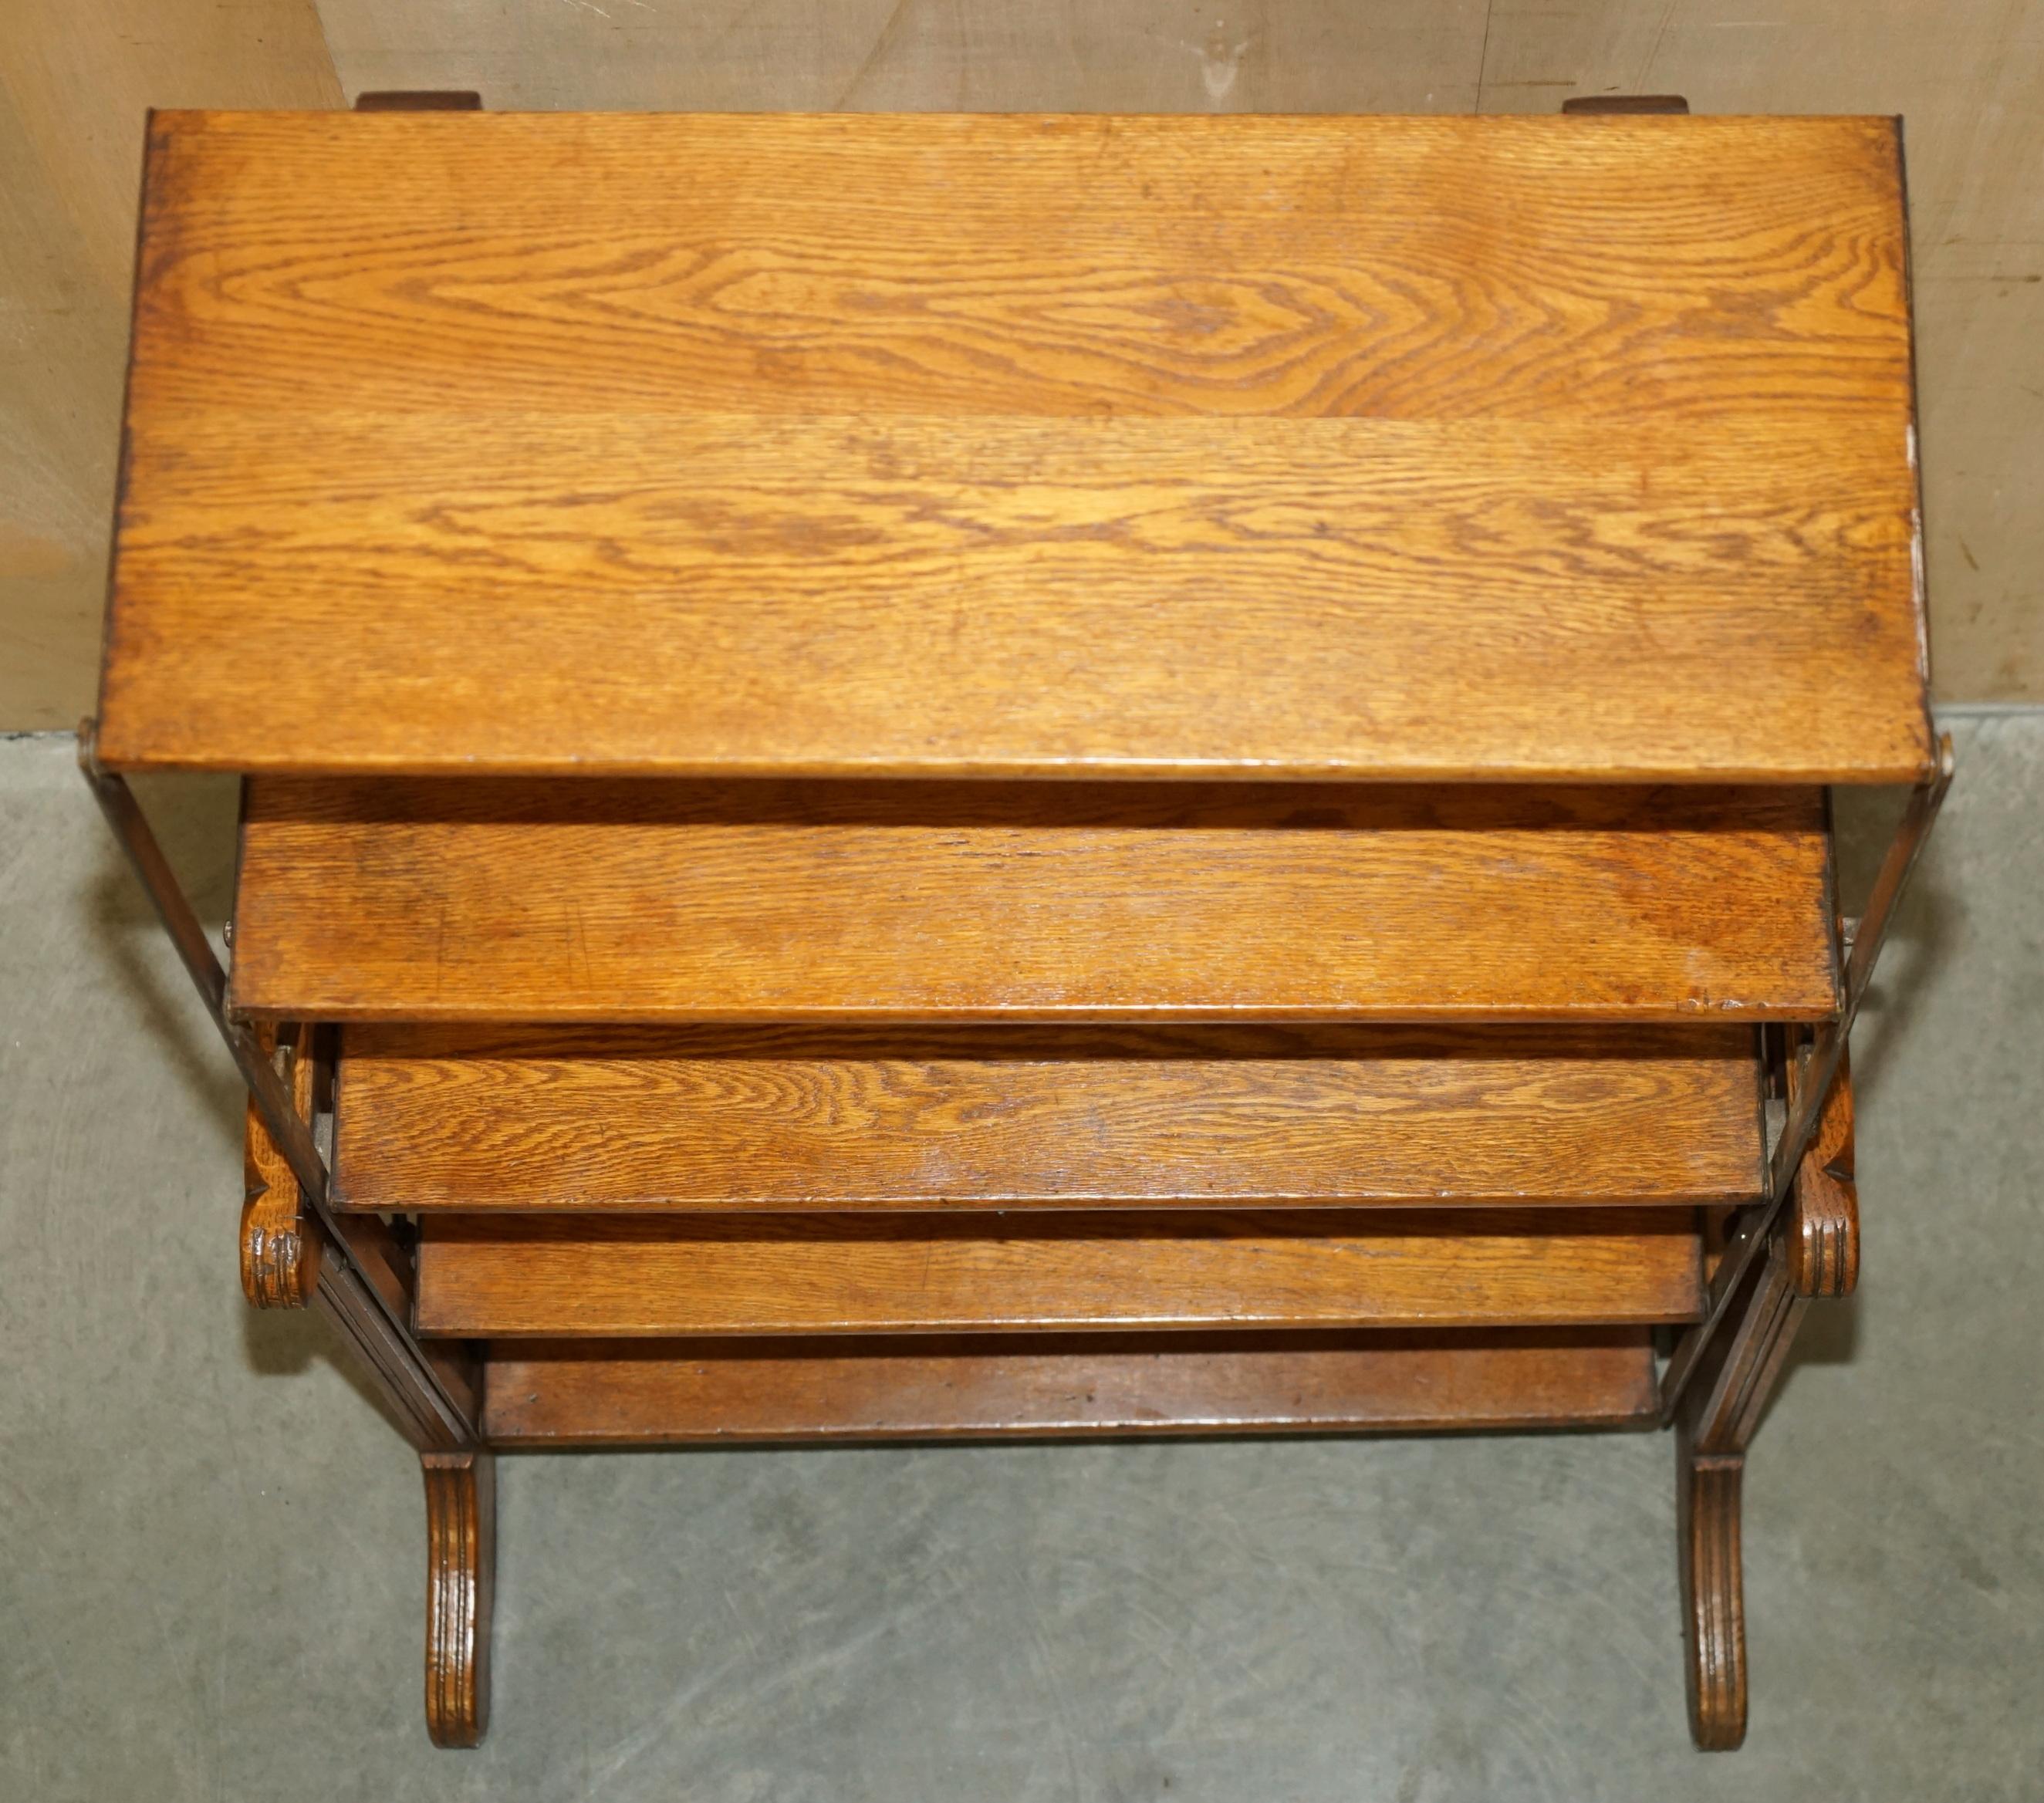 FULLY RESTORED CiRCA 1910 BOECKH BROTHERS METAMORPHIC BAKERS TABLE BOOKCASE For Sale 5